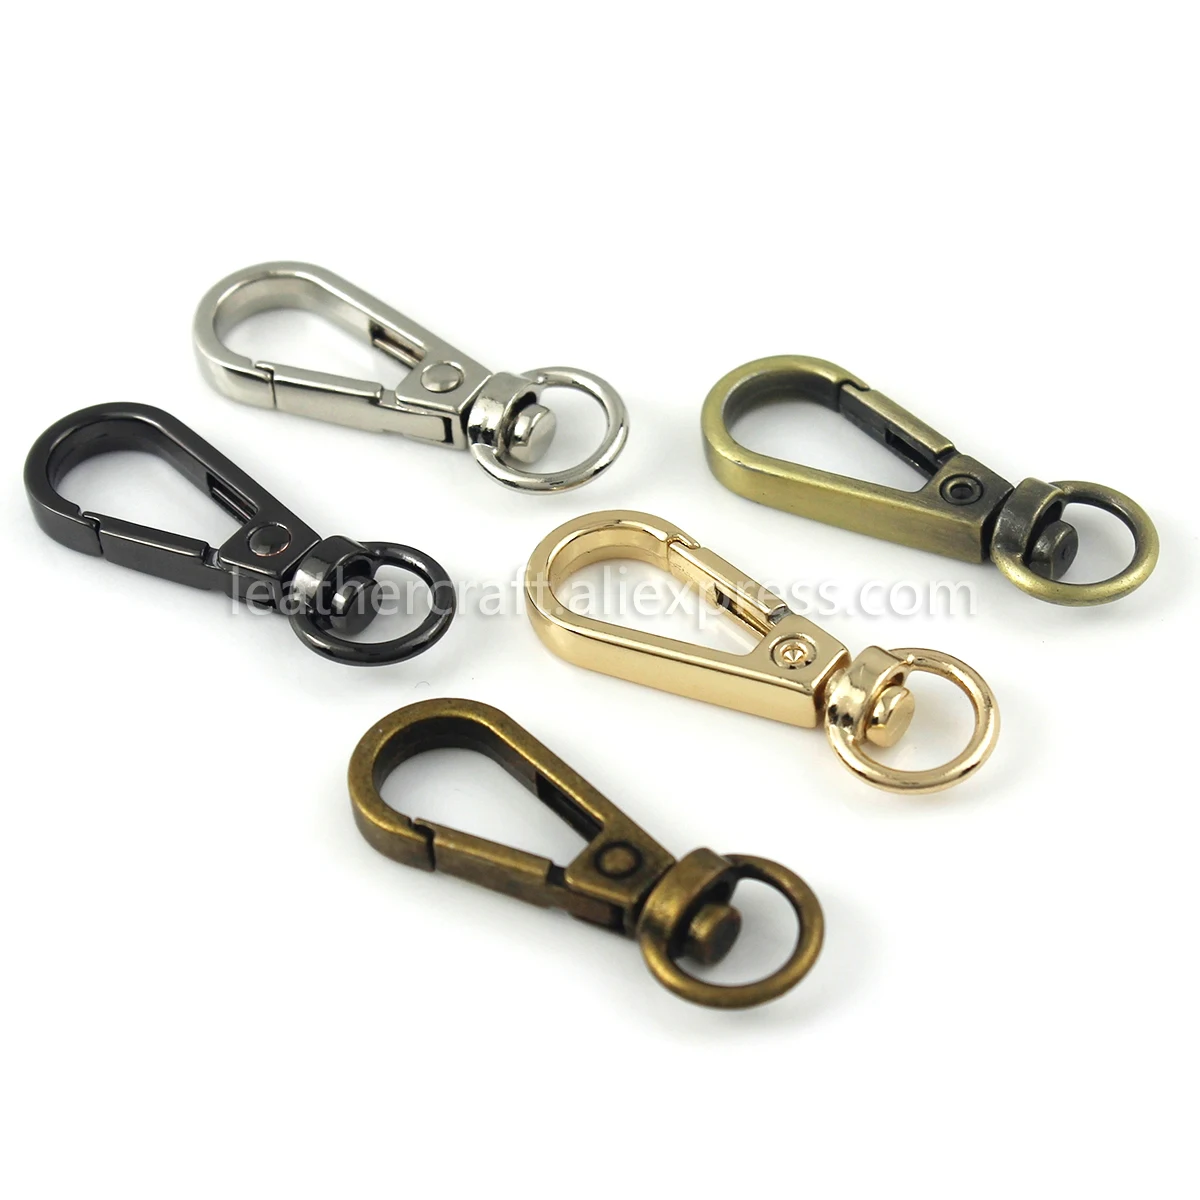 1pcs Metal Swivel O-ring Eye Snap Hook Trigger Clasps Clips for Leather Craft Bag Strap Belt Webbing Keychain Small Size images - 6